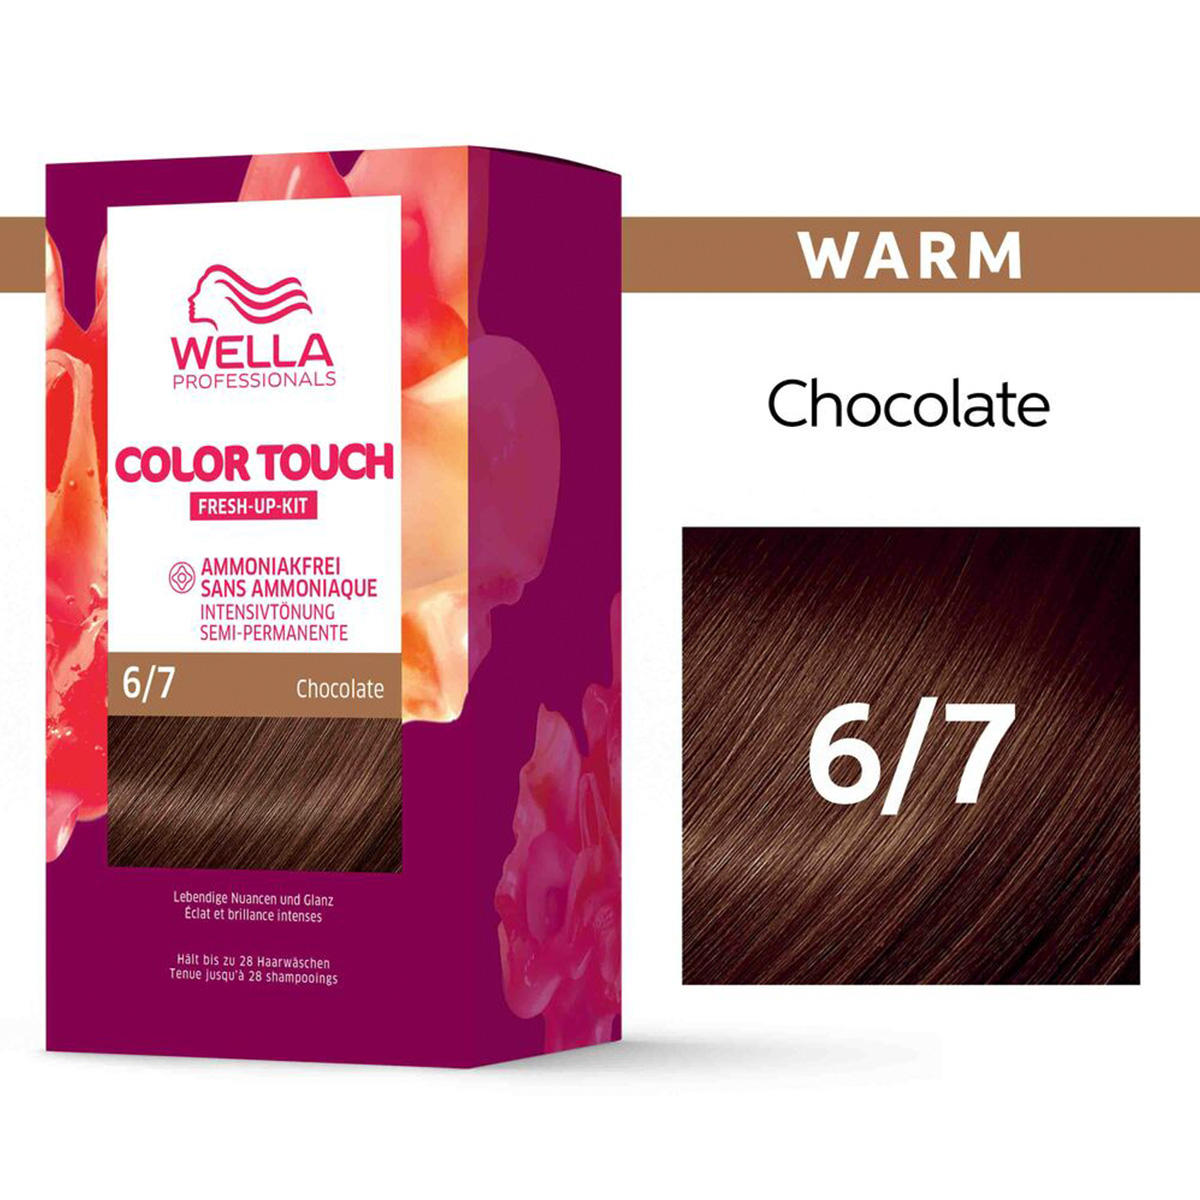 Wella Color Touch Fresh-Up-Kit 6/7 Biondo scuro 130 ml - 2